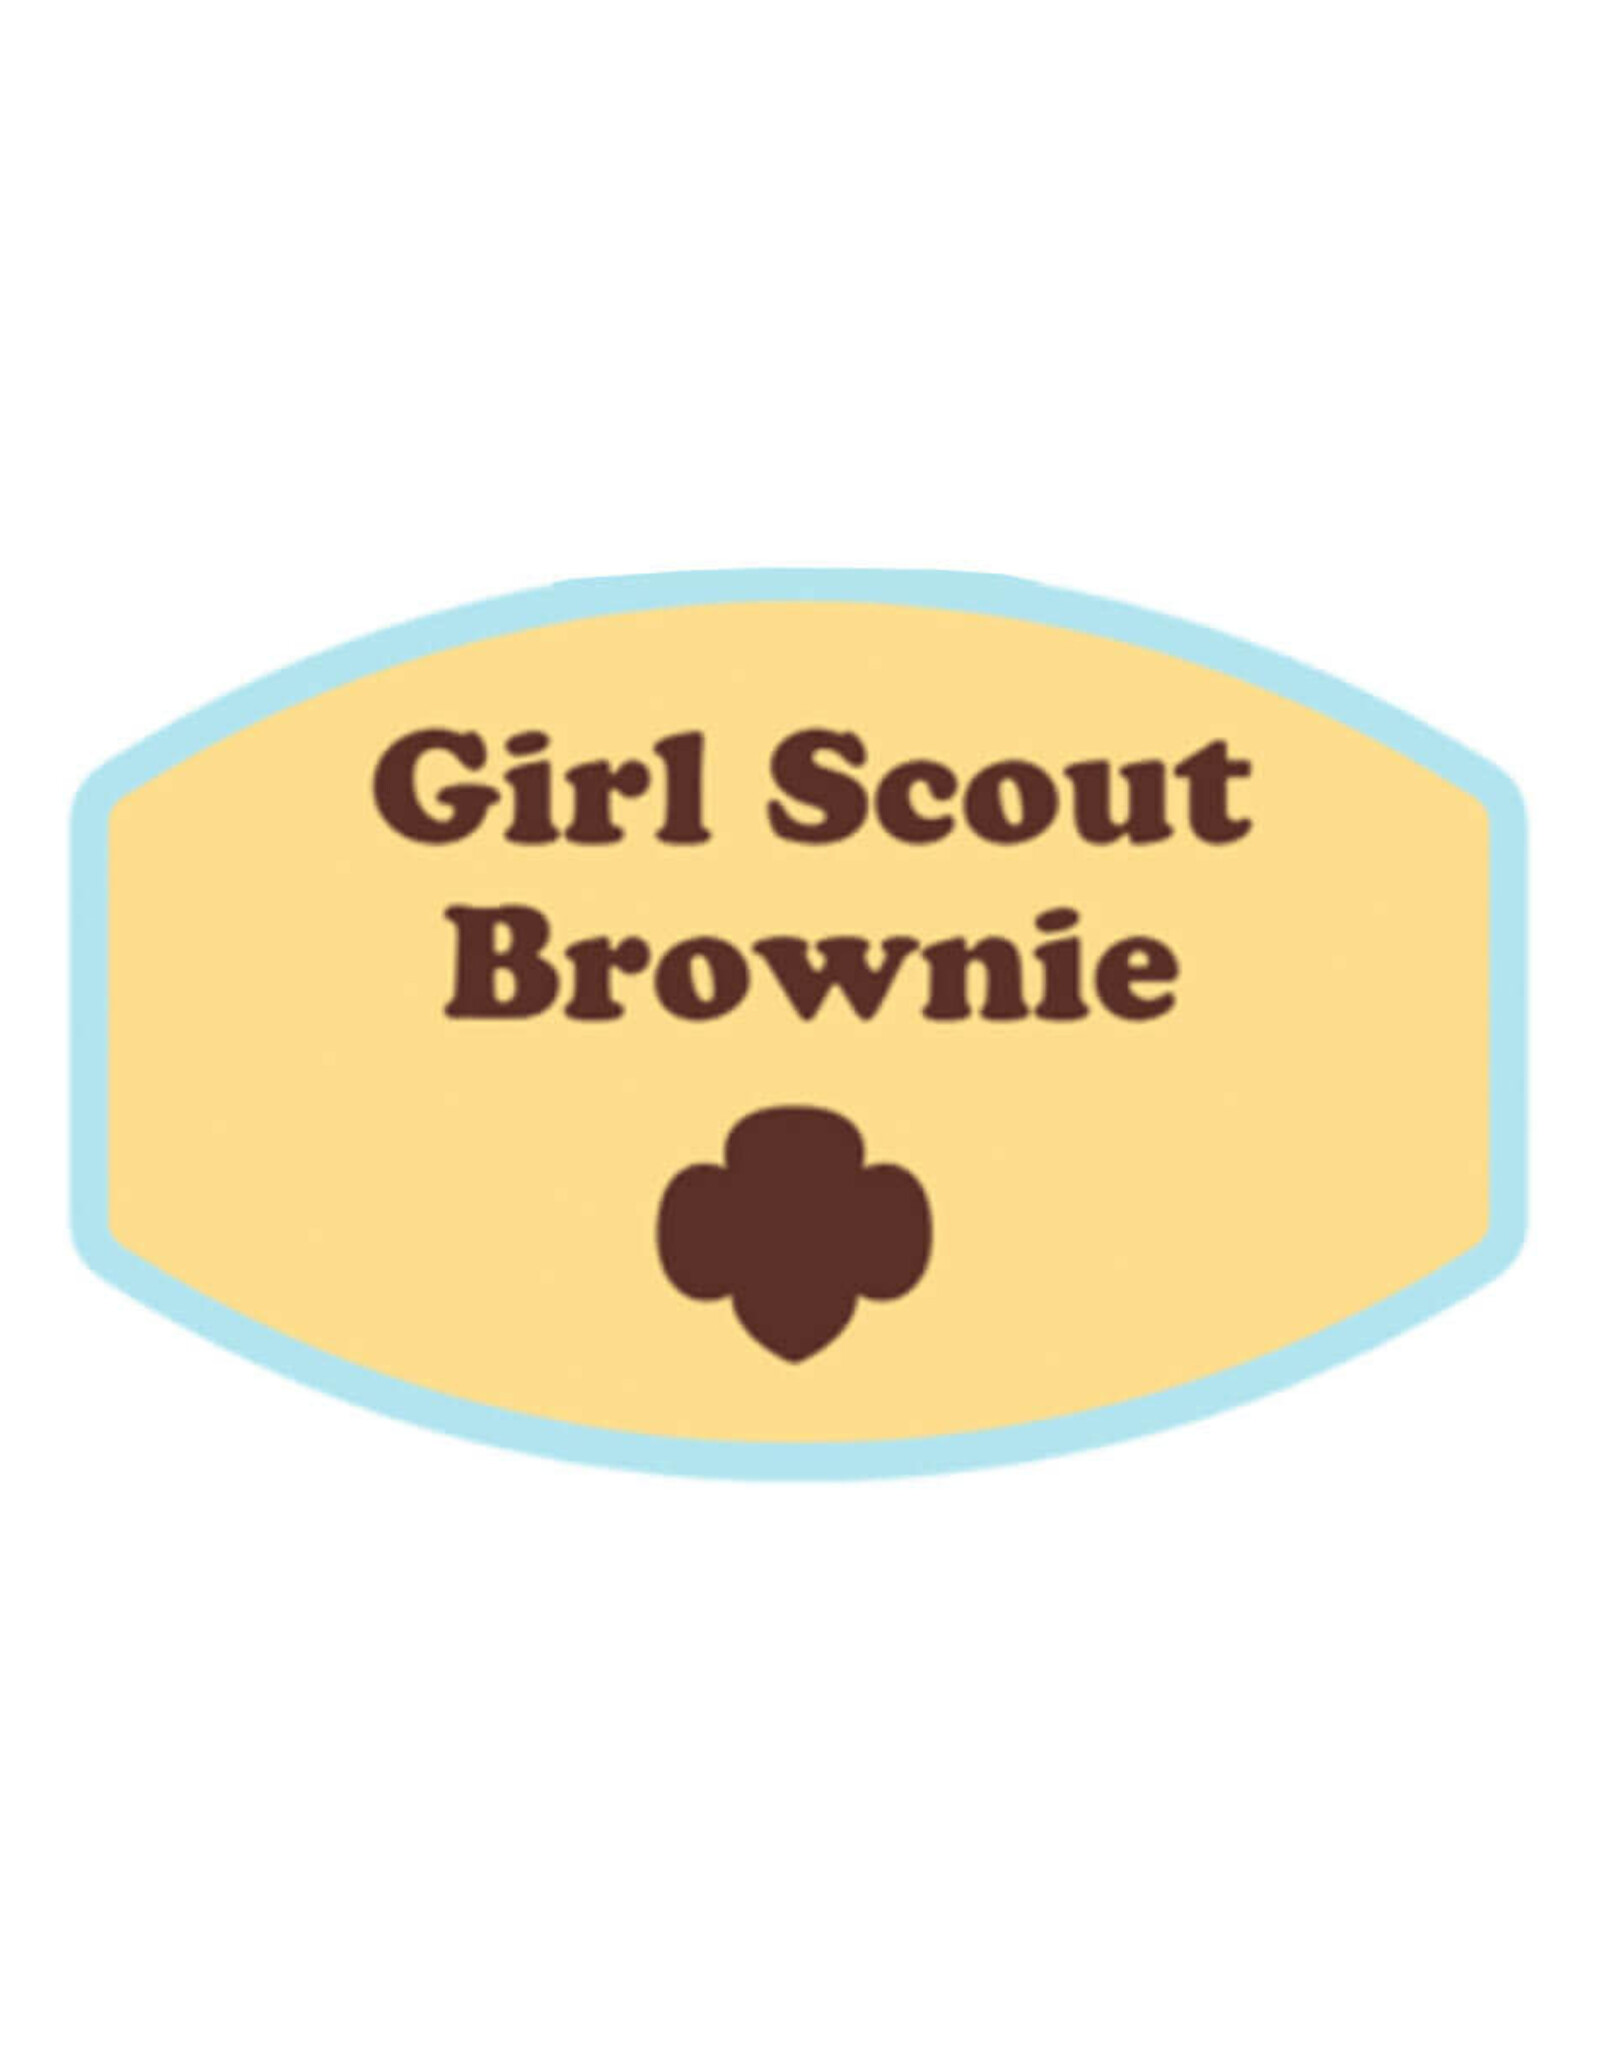 GSUSA Girl Scout Brownie Decal